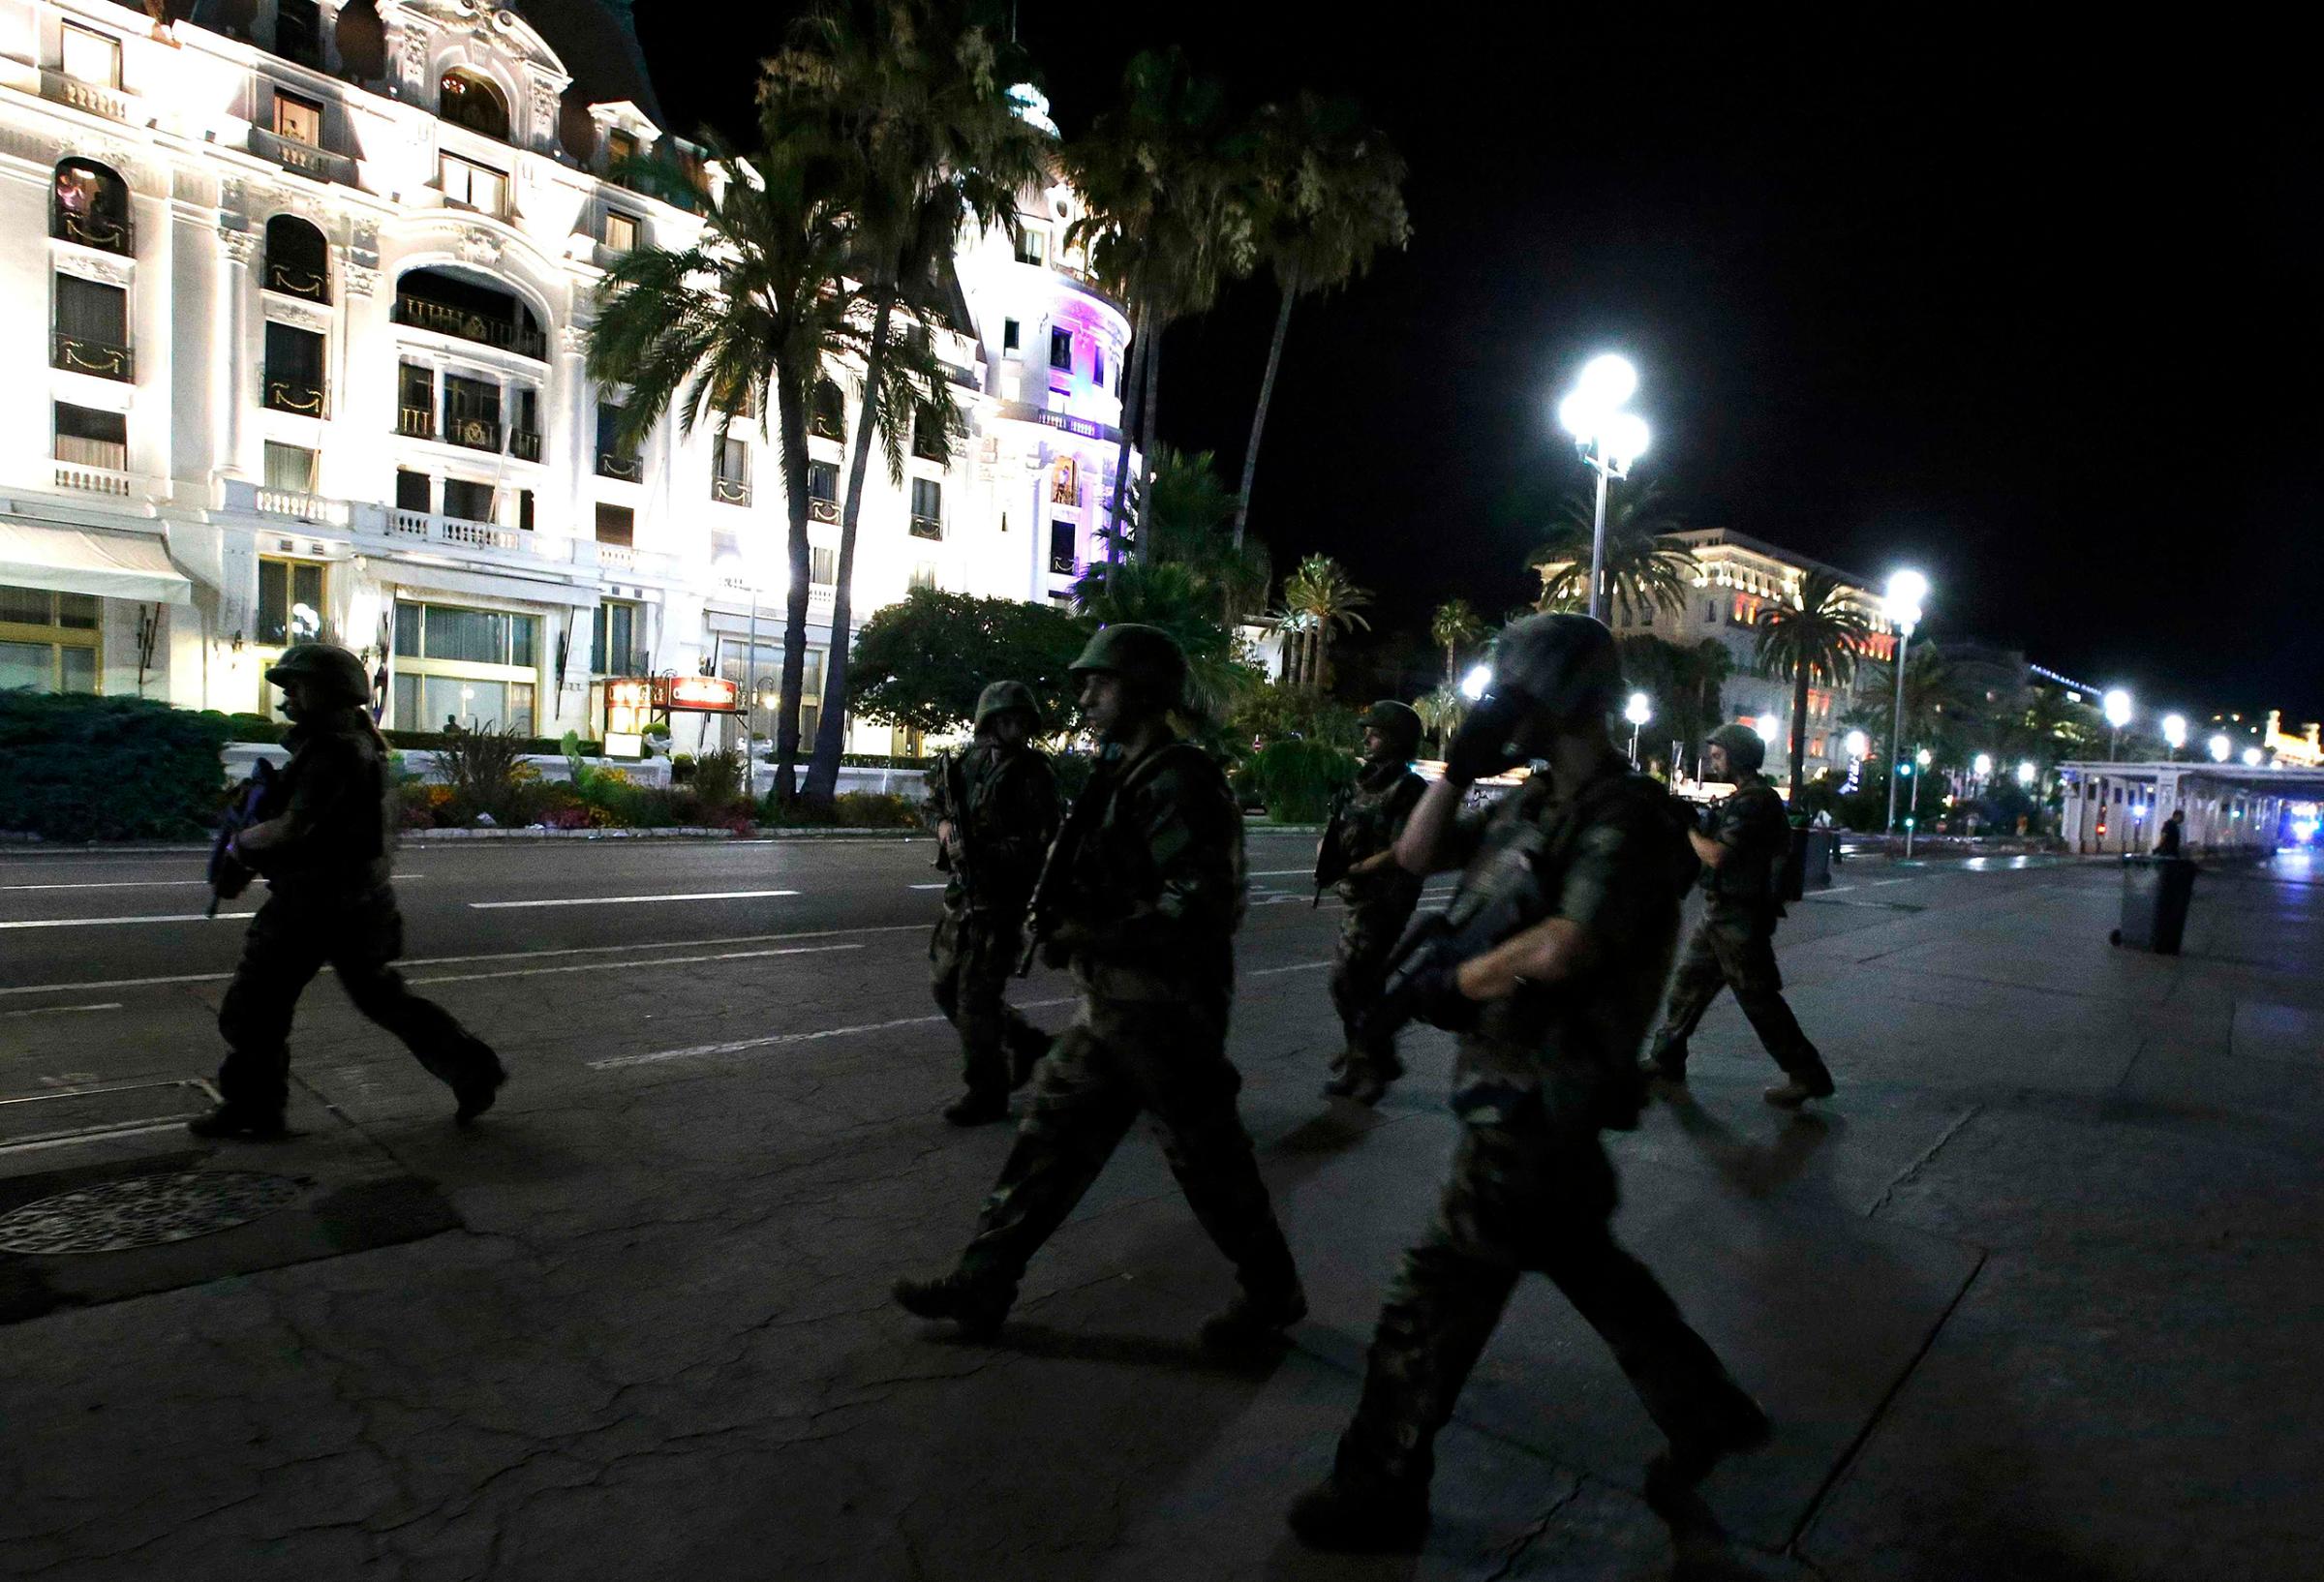 French soldiers advance on the street after at least 70 people were killed in Nice, France, when a truck ran into a crowd celebrating the Bastille Day national holiday on July 14, 2016.